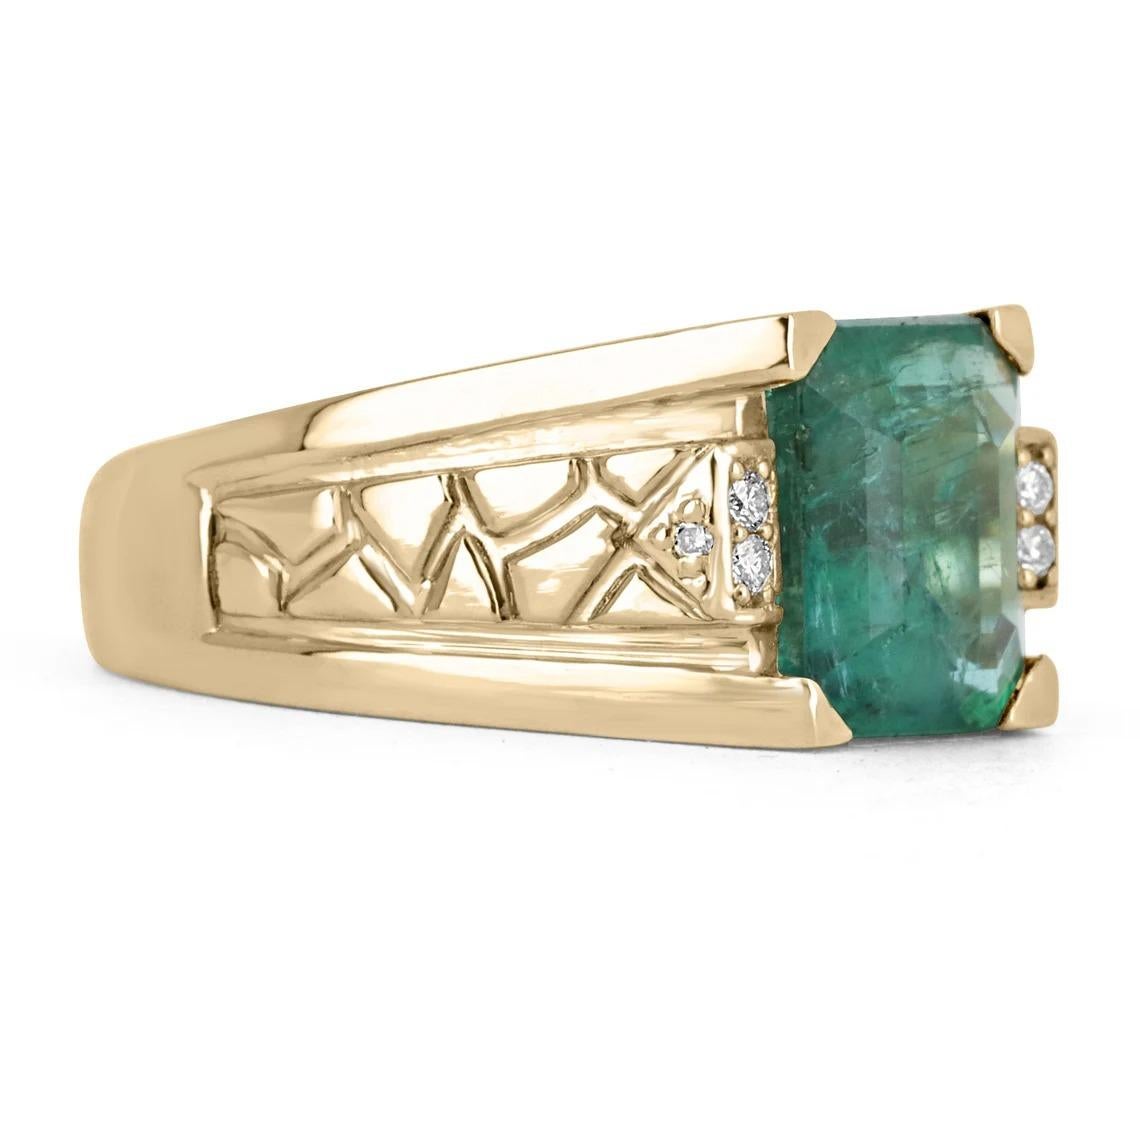 Featured is a stunning natural emerald and diamond accent men's ring. The center stone carries a full 3.25-carat, natural Zambian emerald with remarkable qualities. Prong set in a exquisite 14K yellow gold setting, with two petite diamonds accenting